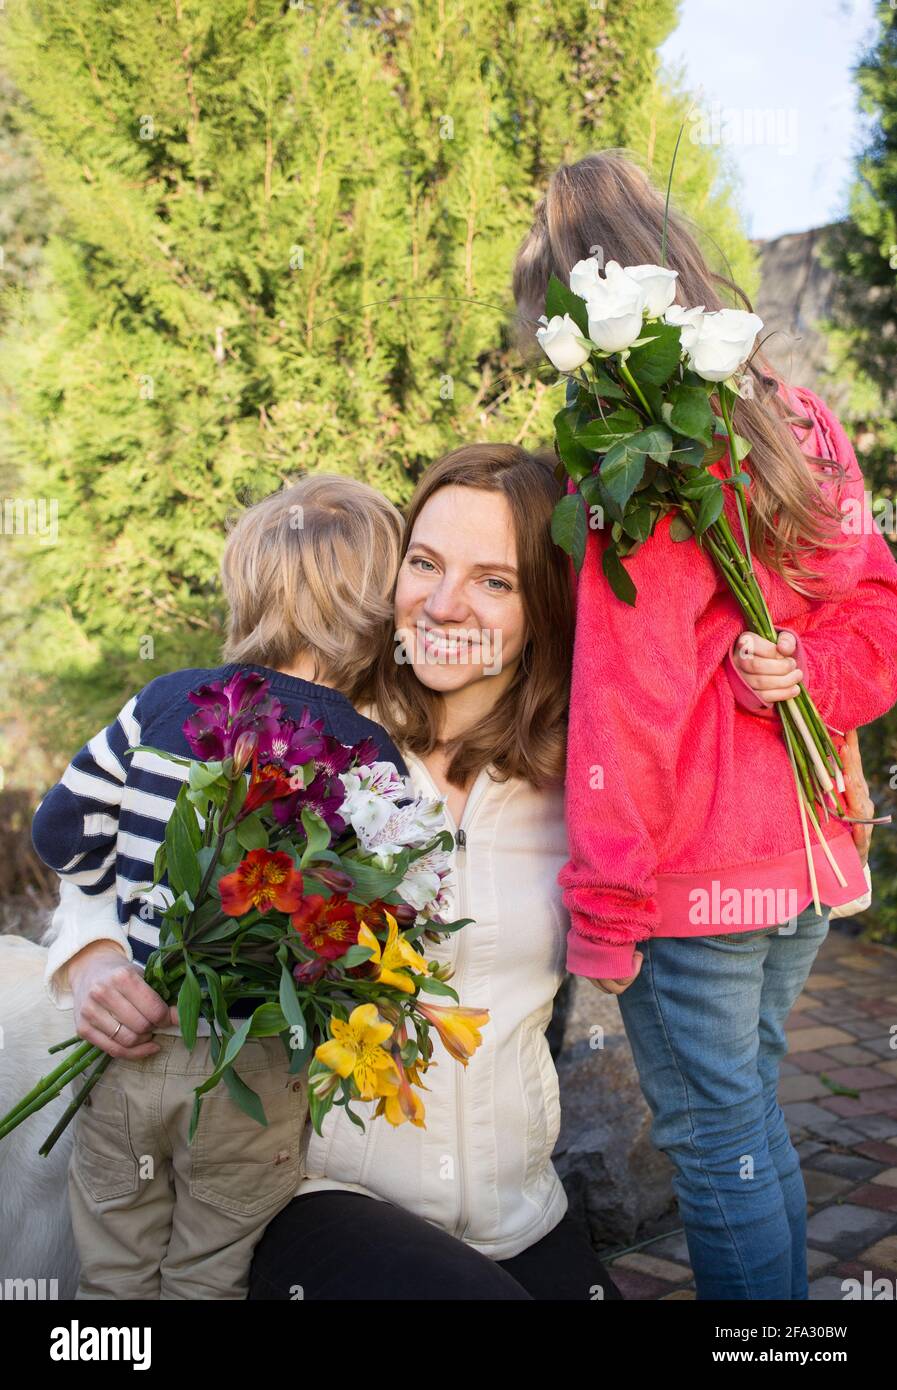 portrait of happy mother, whom unrecognizable children, boy and girl give 2 bouquets of flowers . Joyful emotions, positive, motherhood. Congratulatio Stock Photo